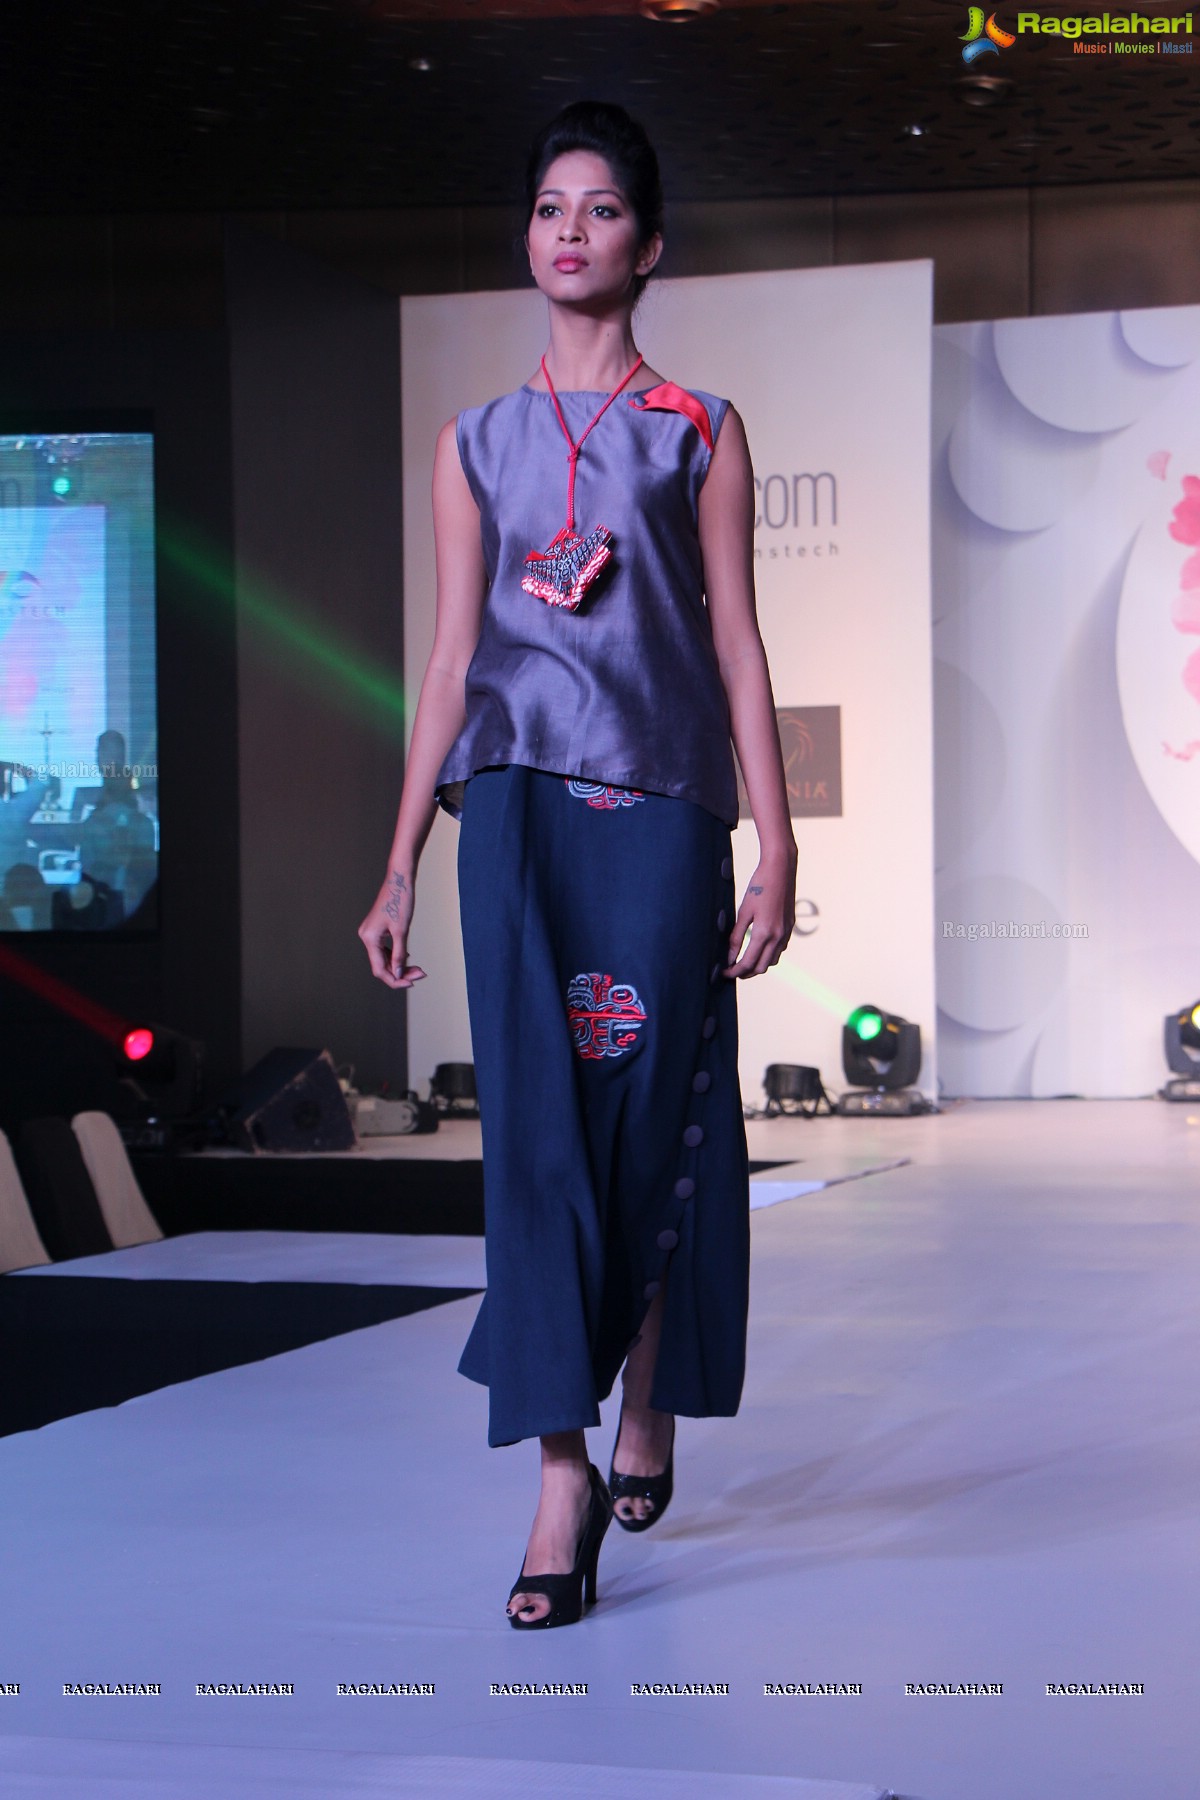 Hamstech Designers Fashion Show at The Park, Hyderabad